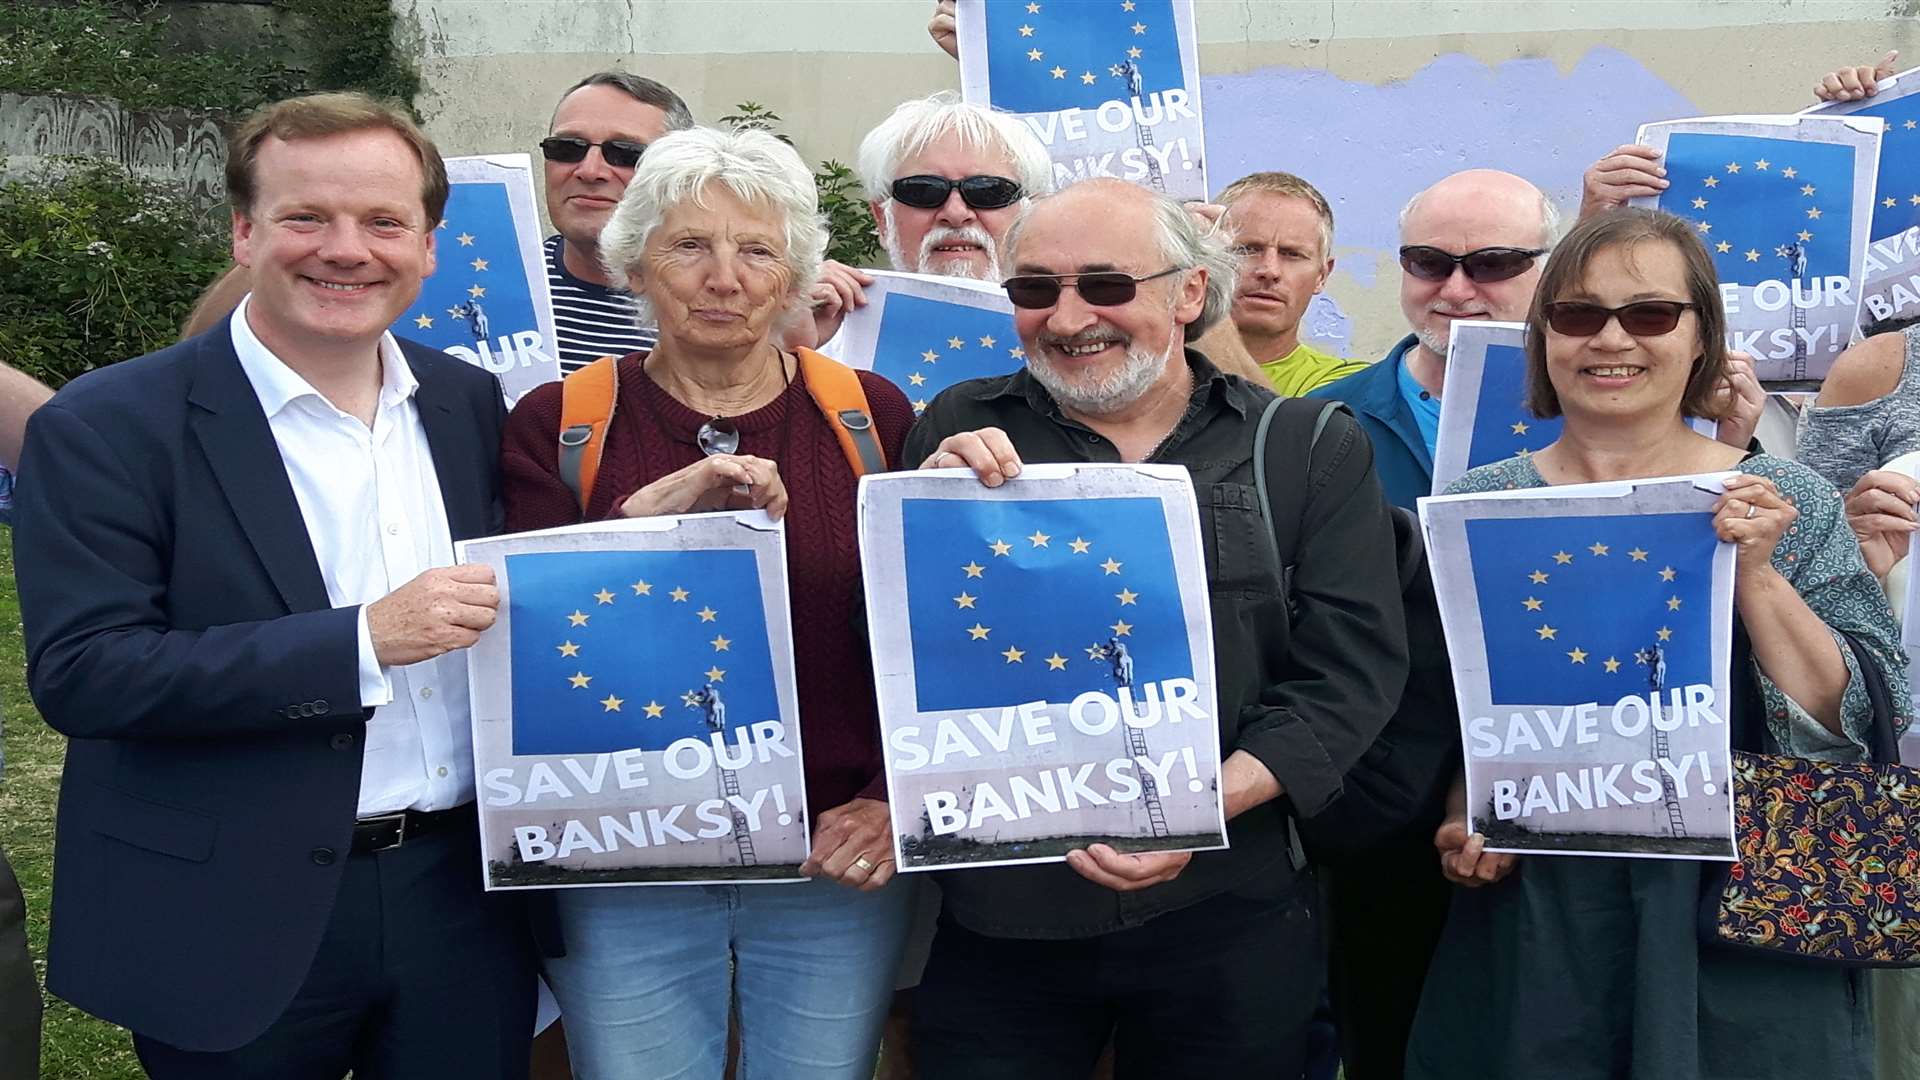 Charlie Elphicke in June with campaigners trying to keep Banksy work in Dover.